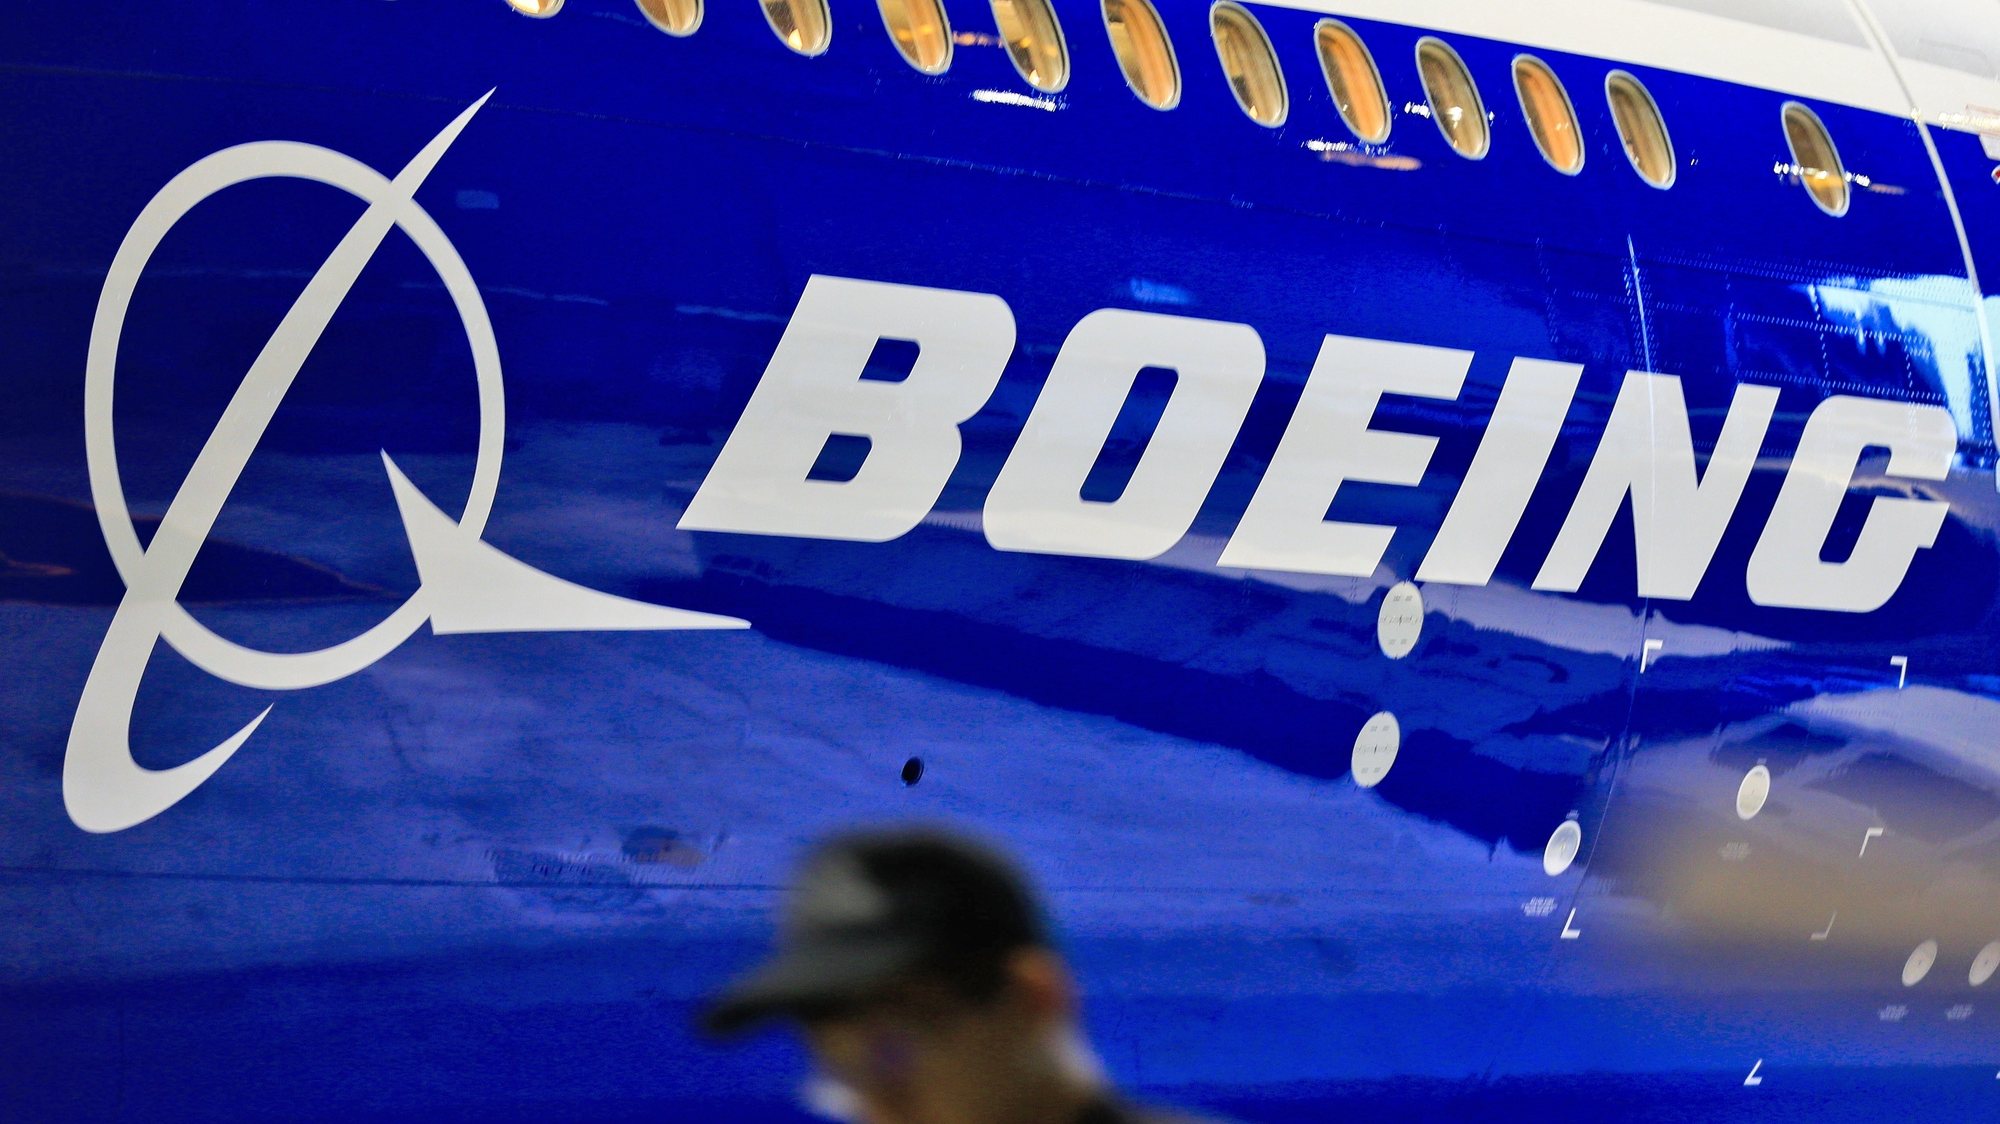 epa08368684 (FILE) - A file photo dated 14 June 2016 showing a man walking past a logo of US aircraft manufacturing company Boeing at Taoyuan airport, in Taoyuan, Taiwan (reissued 17 April 2020). Reports on 17 April 2020 state the Boeing Chief Executive Dave Calhoun told company staff Boeing would restart the production of the 747, 767, and 777 commercial airplanes at their Puget sound facilities in the Washington state on 20 April.  EPA/RITCHIE B. TONGO *** Local Caption *** 53278185